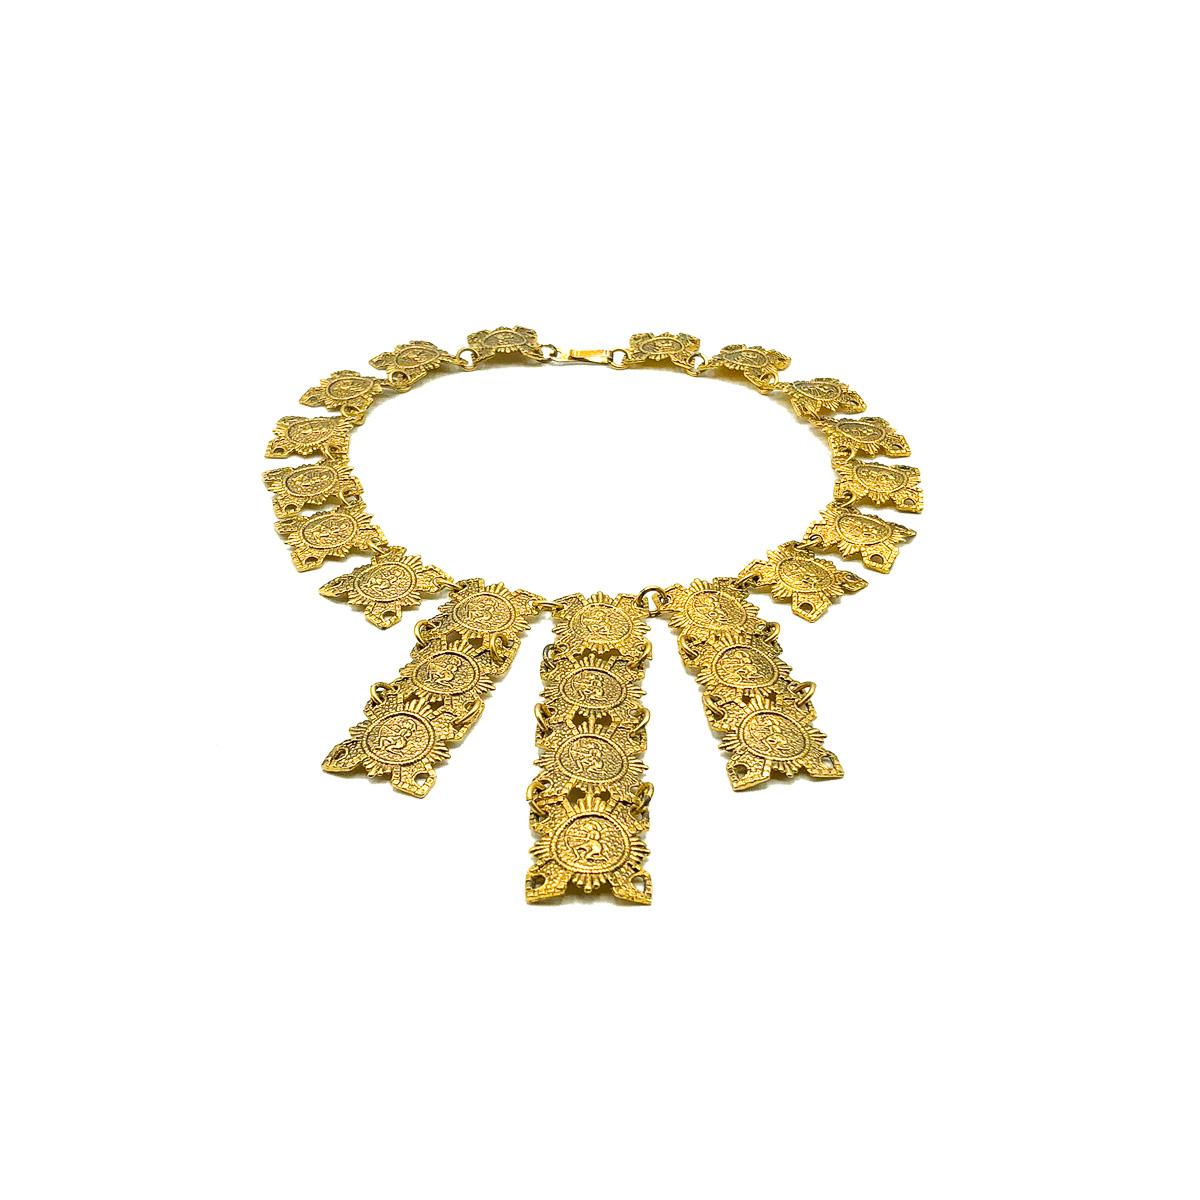 A stunning Vintage gold Egyptian bib from the 1960s; most likely a piece of Egyptian revival jewellery inspired by Elizabeth Taylor's iconic Cleopatra. Crafted in gold plated metal. Featuring medal style sections arranged to form a collar and